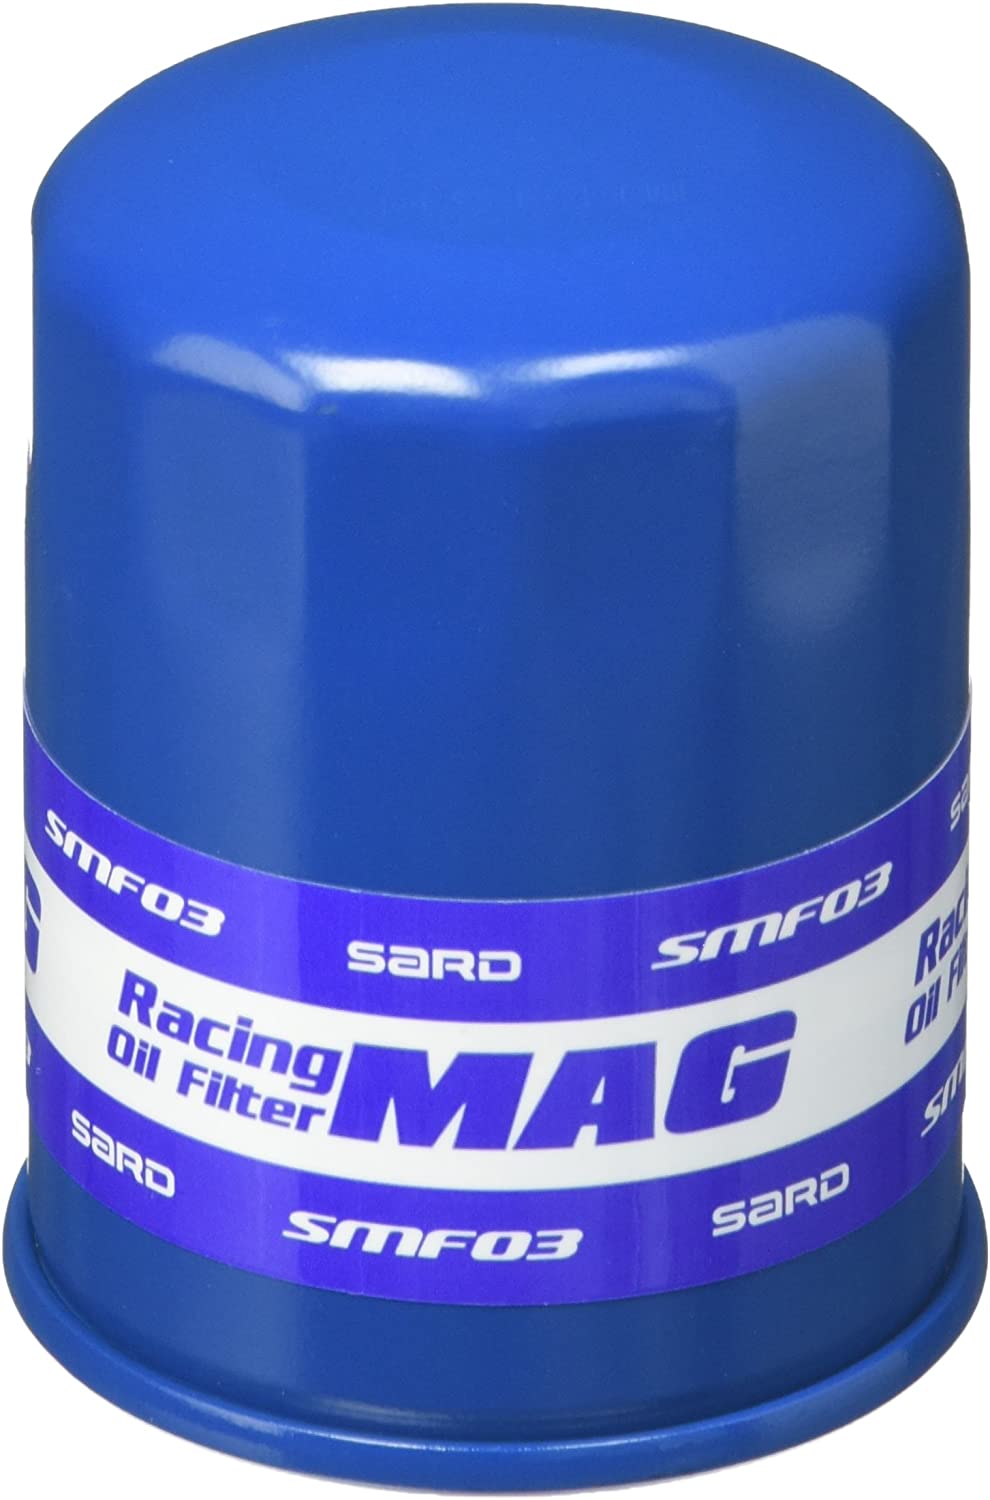 SARD RACING OIL FILTER For STREAM RN3 RN4 SMF03